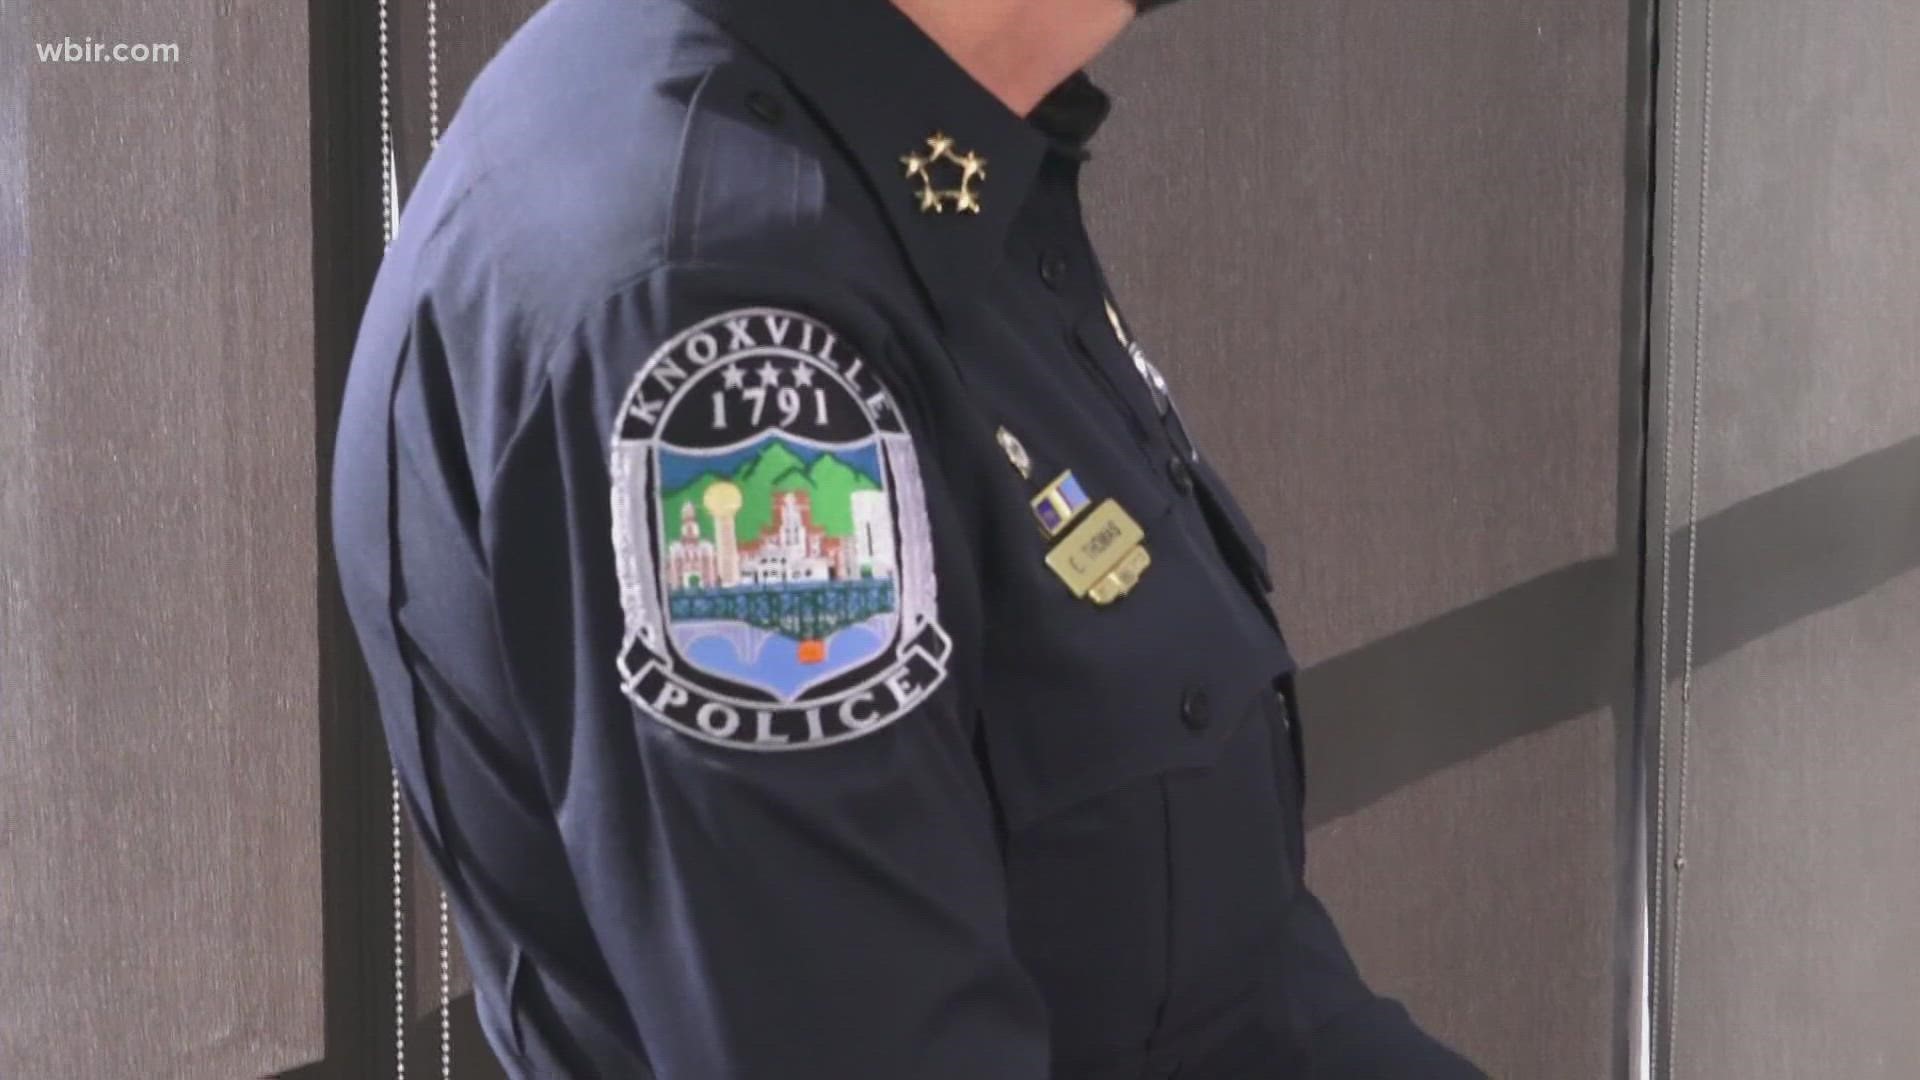 The City of Knoxville will host five drop-in-style listening sessions as the search for a new chief continues.